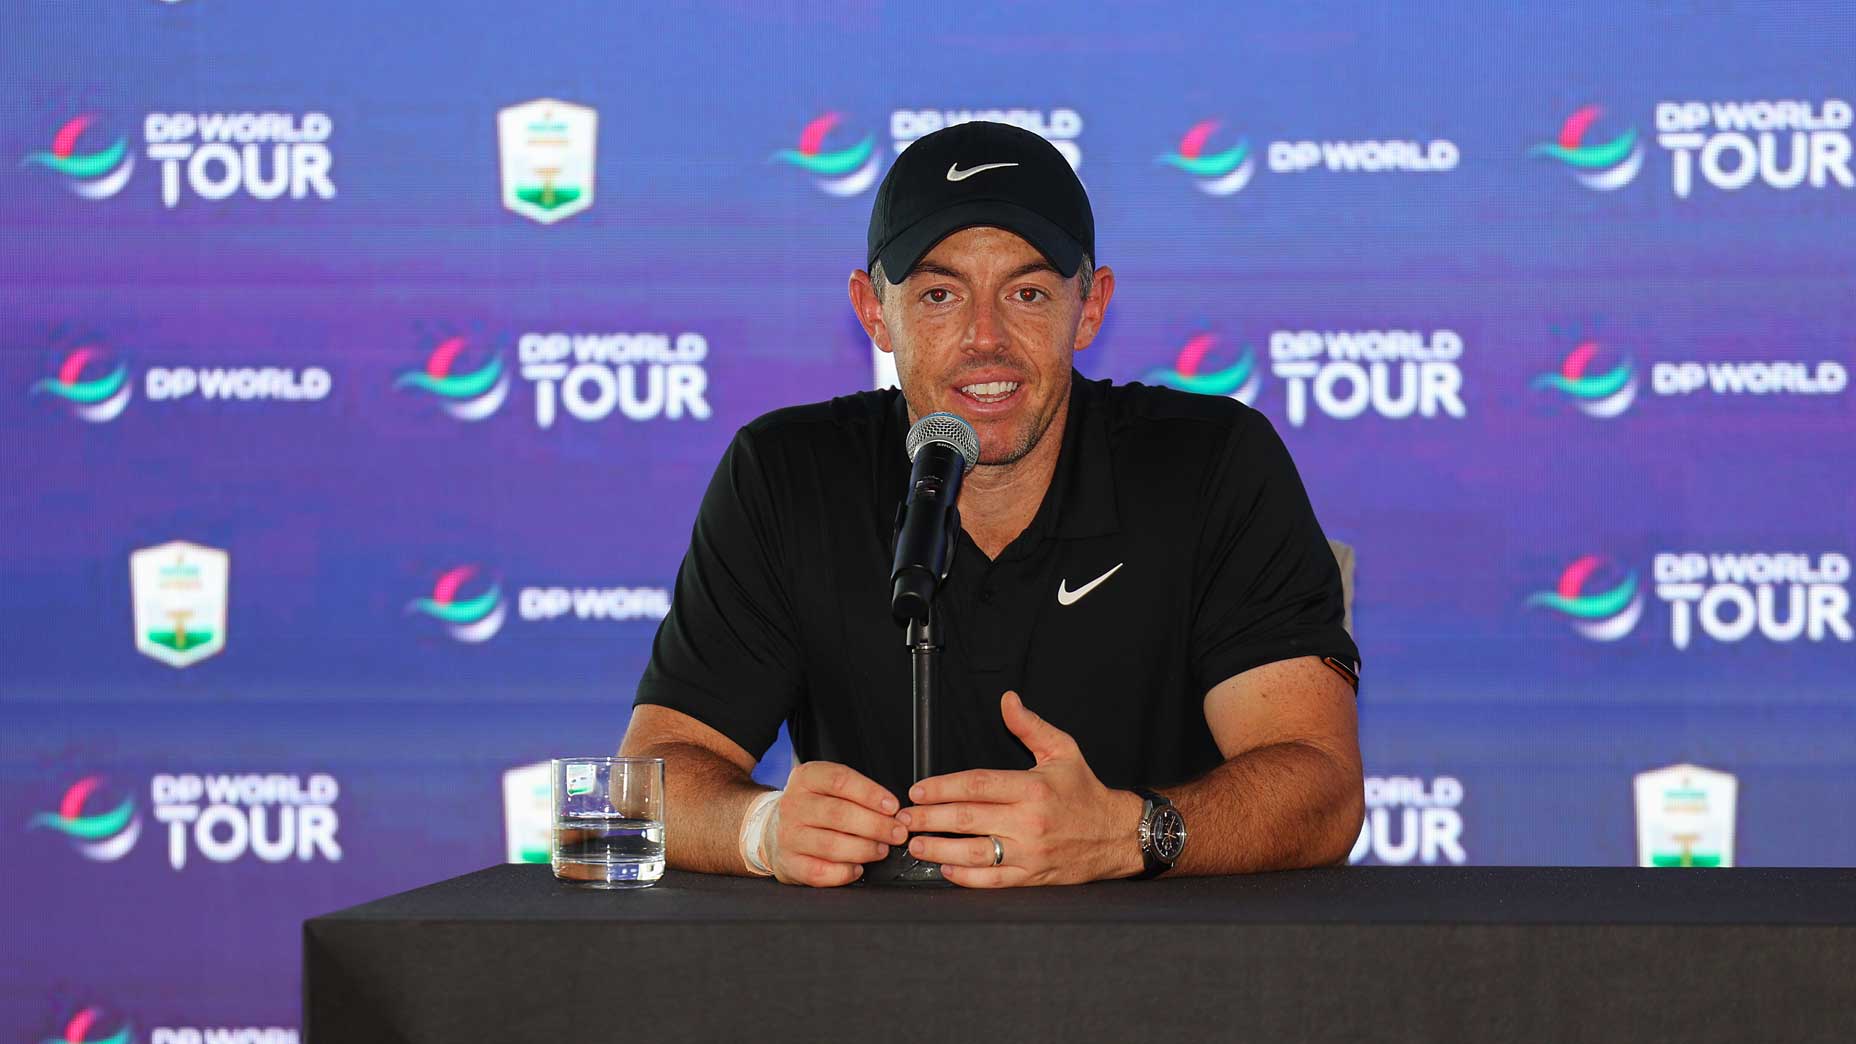 Rory McIlroy speaking at press conference